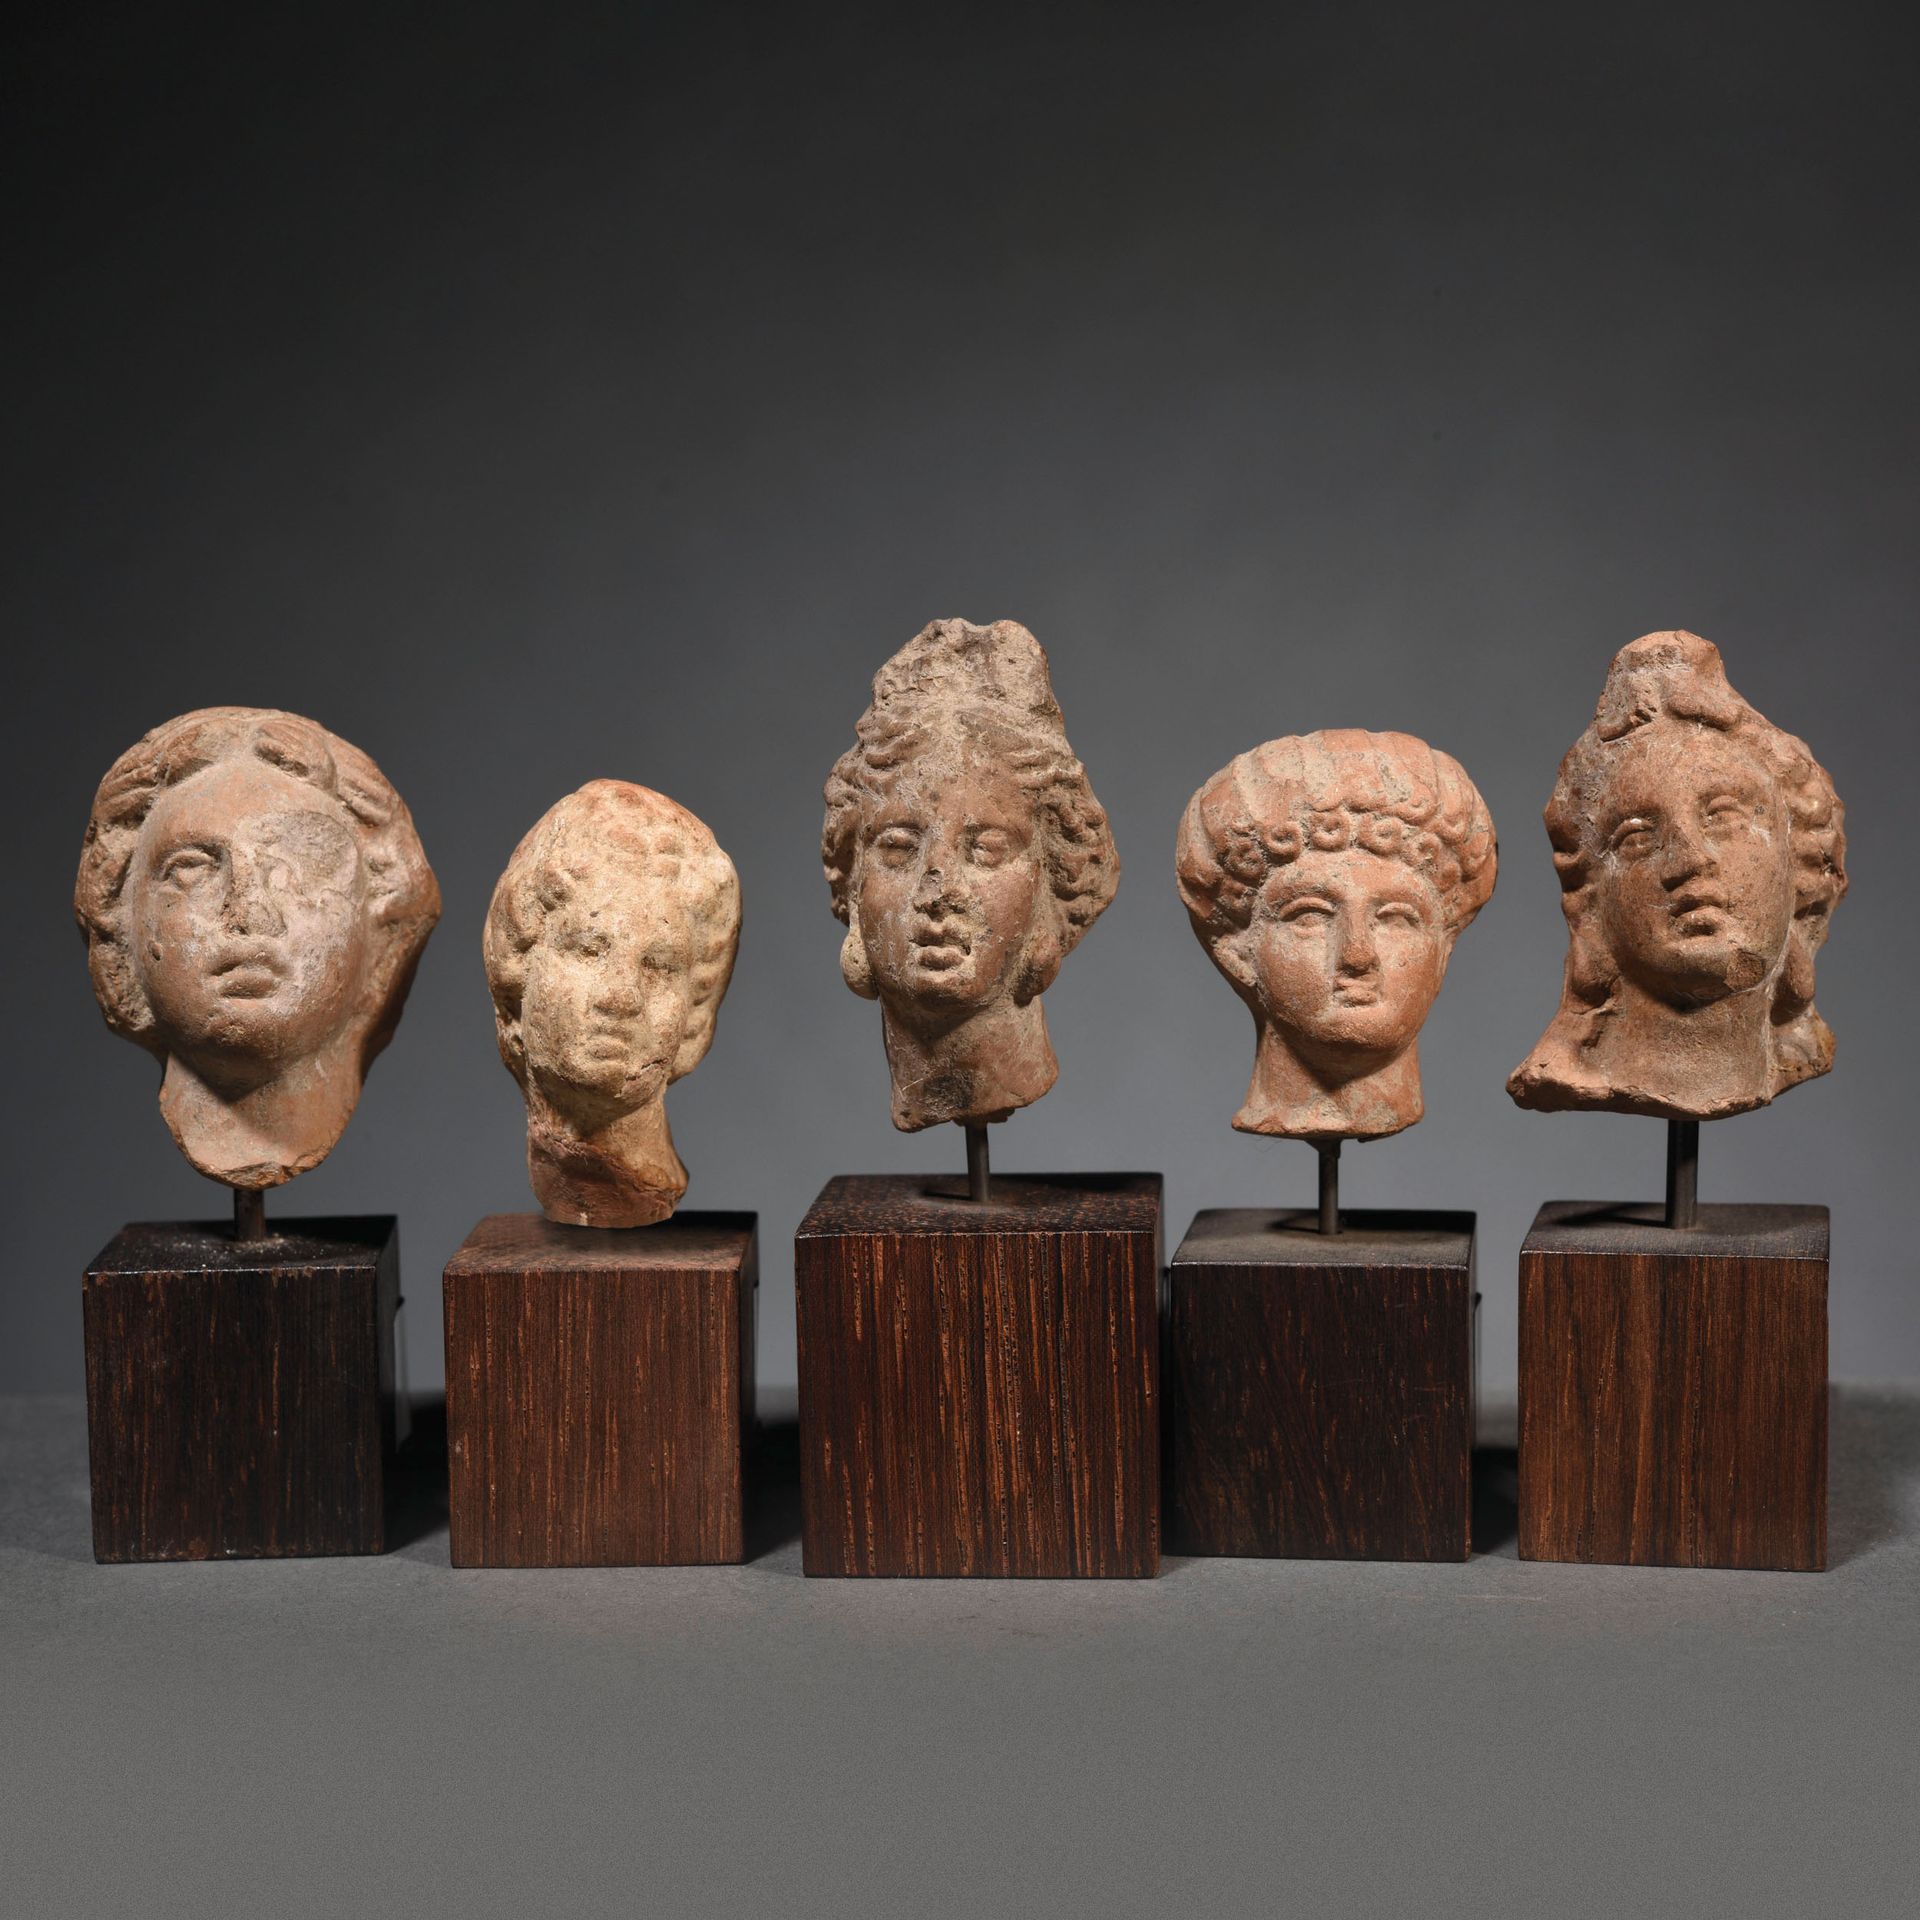 Null LOT OF 5 EX-VOTO HEADS

Hellenistic art

In terracotta 



Provenance

Form&hellip;